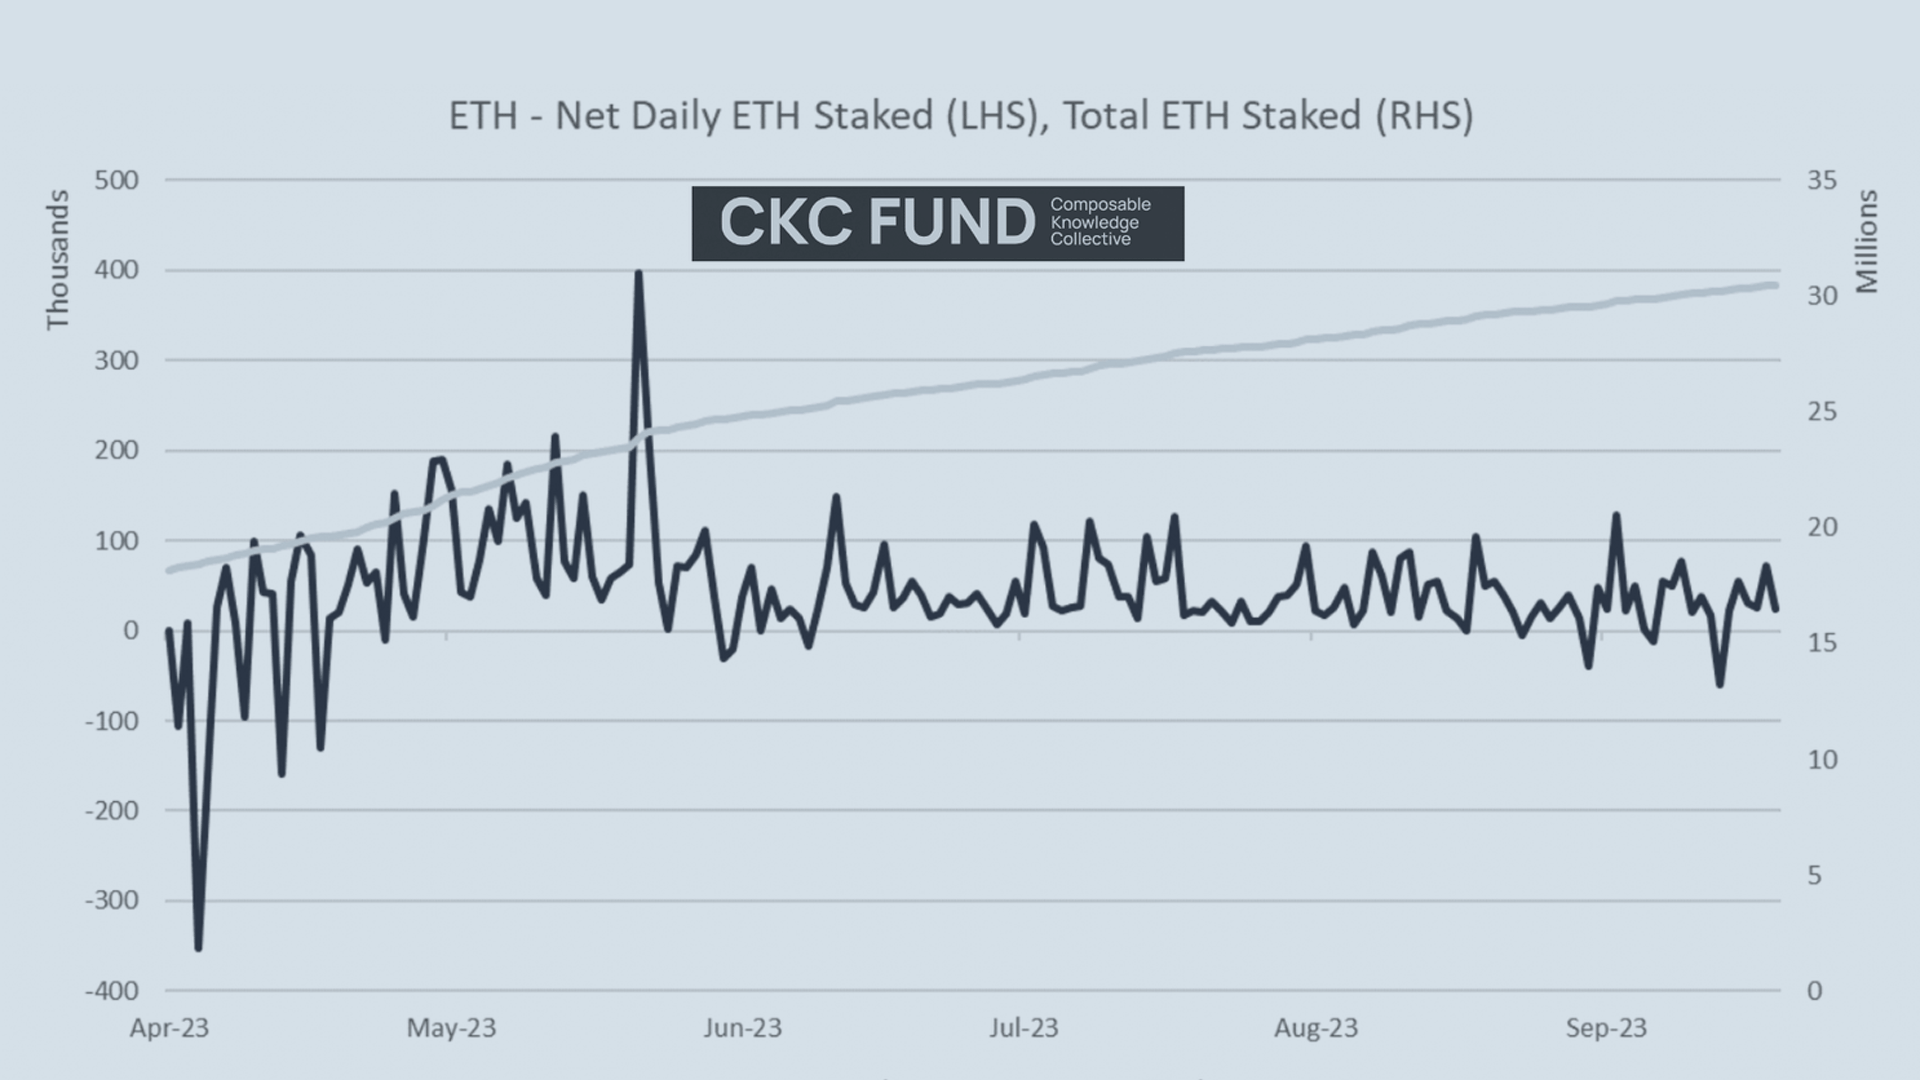 Line graph from CKC Fund showing Ethereum's net daily ETH staked and total ETH staked from April to September 2023, indicating a gradual increase in total stakes with fluctuating daily net deposits.